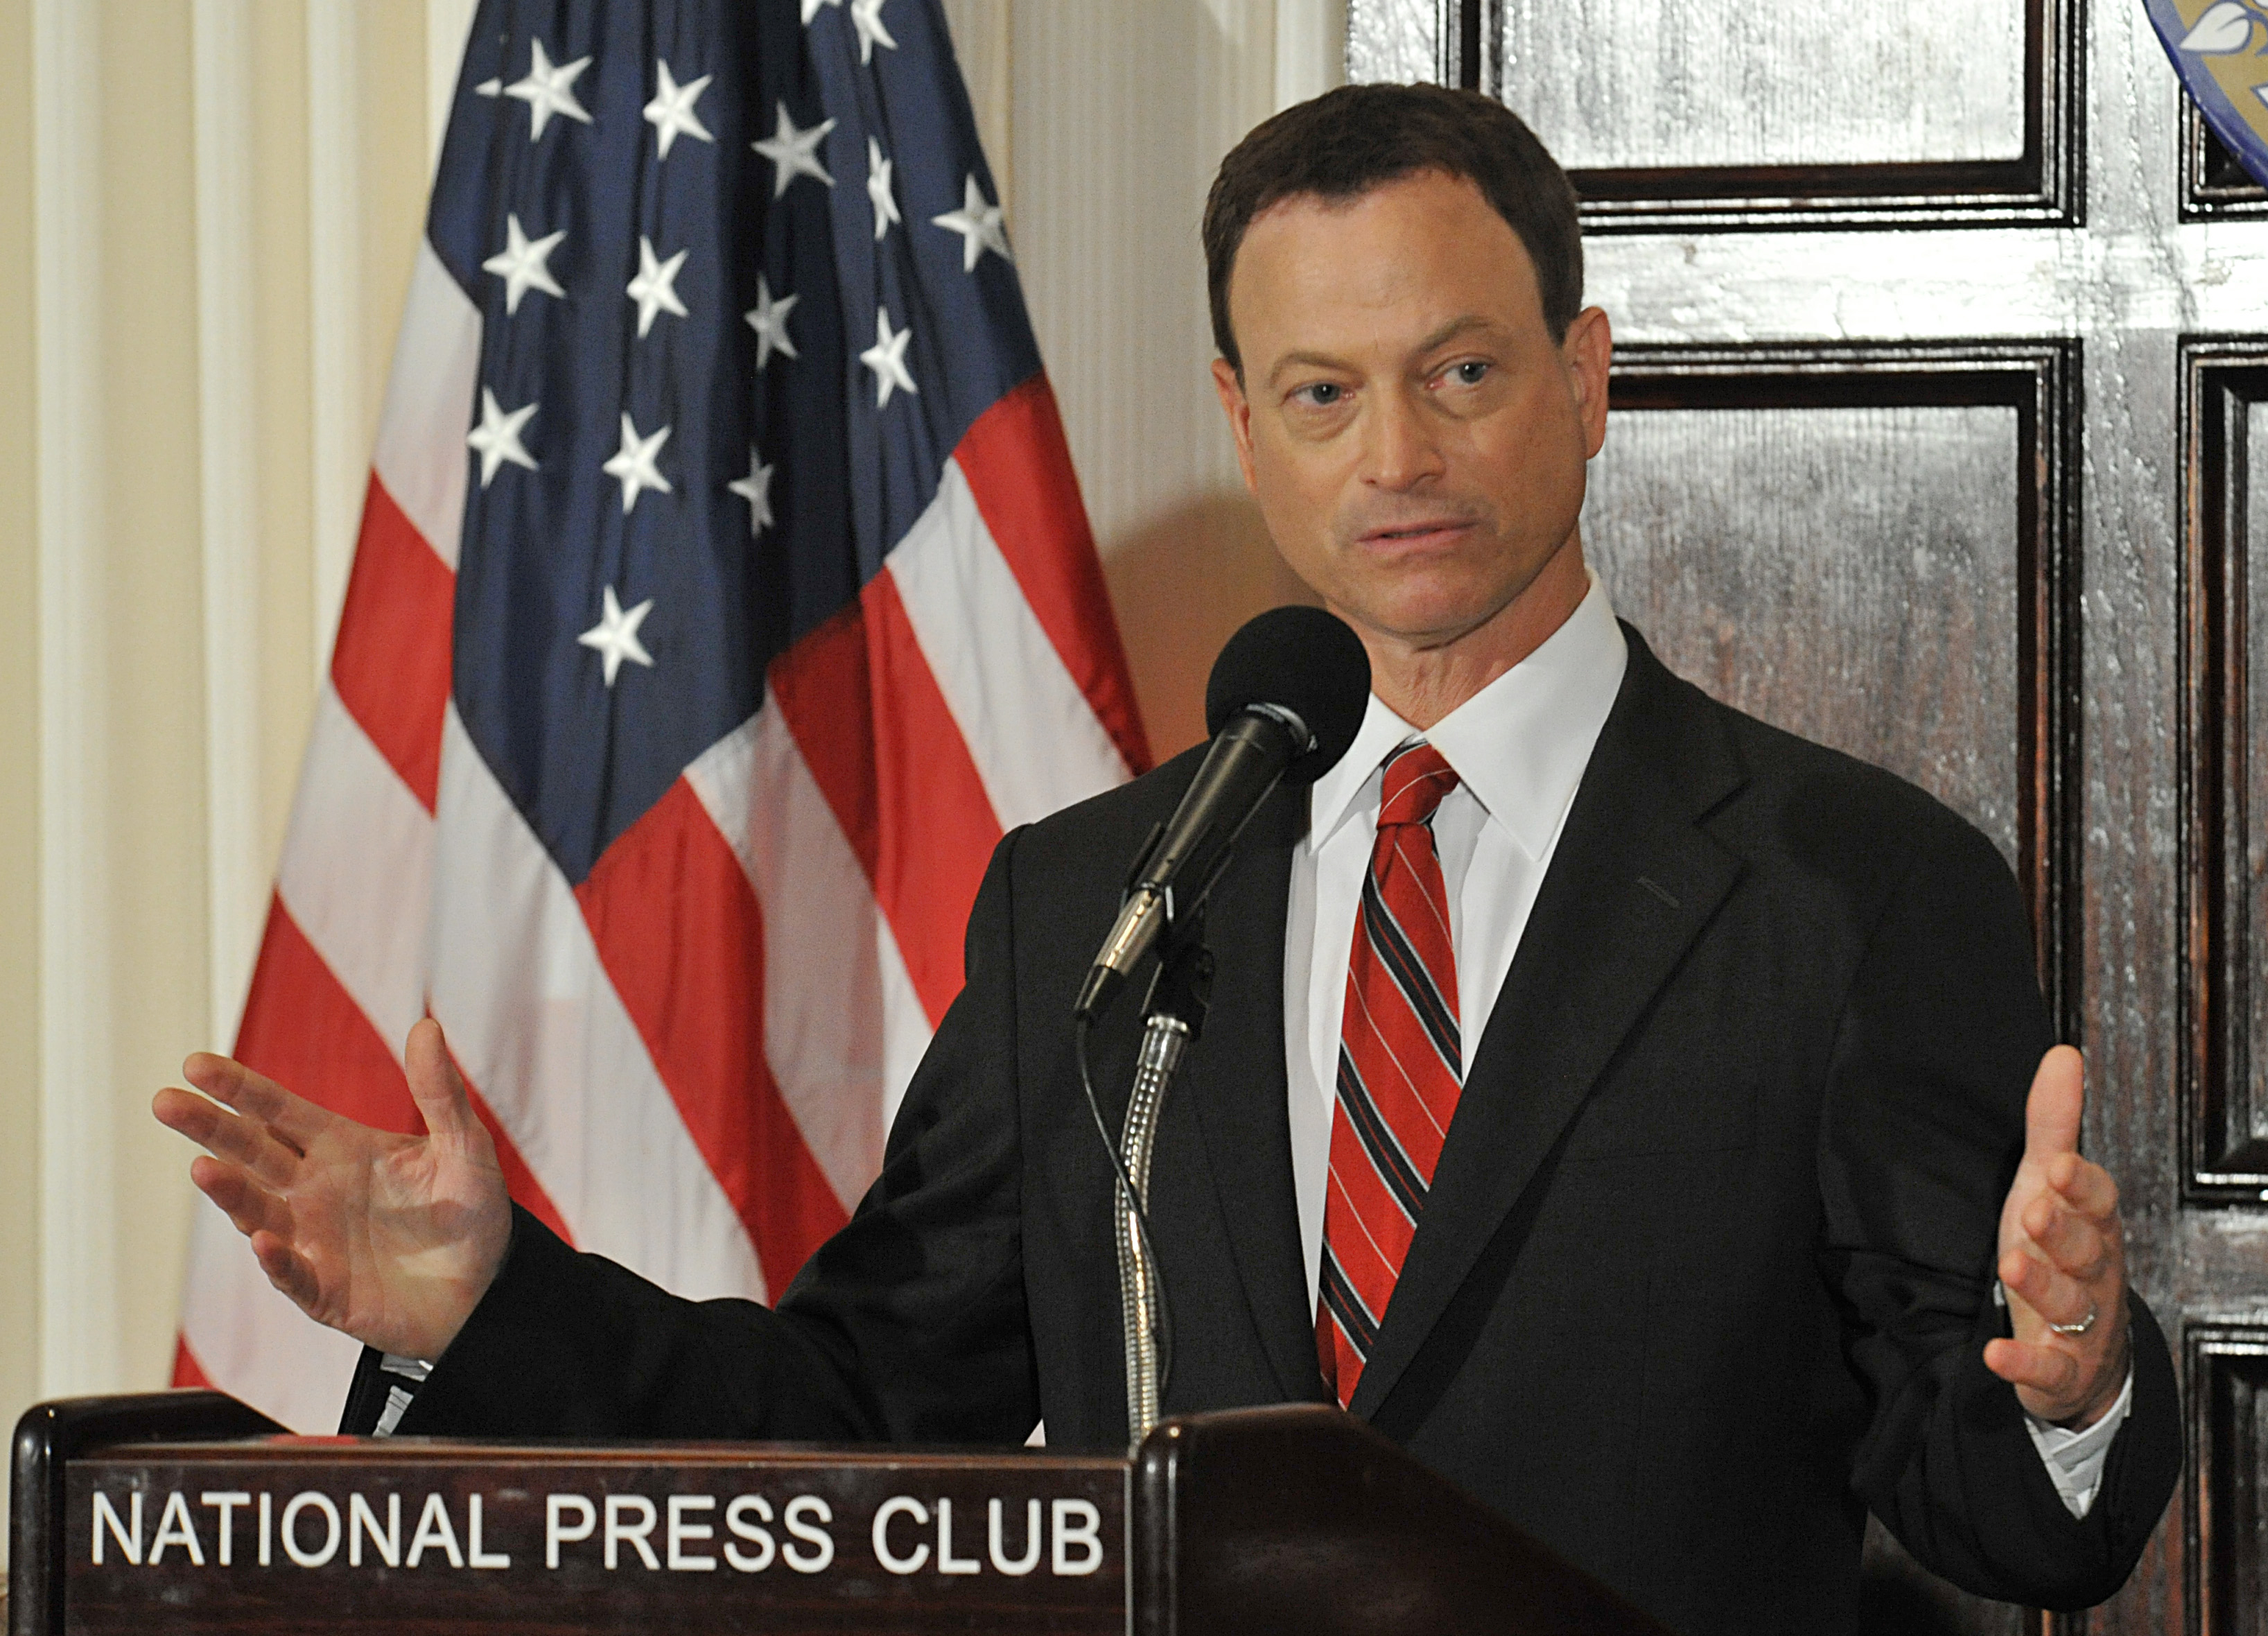 actor Gary Sinise addresses an audience June 30, 2011, at the National Press Club in Washington, DC. Sinise announced the formation of the "Gary Sinise Foundation," to honor the Nation's defenders, veterans, first responders, their families and those in need | Source: Getty Images